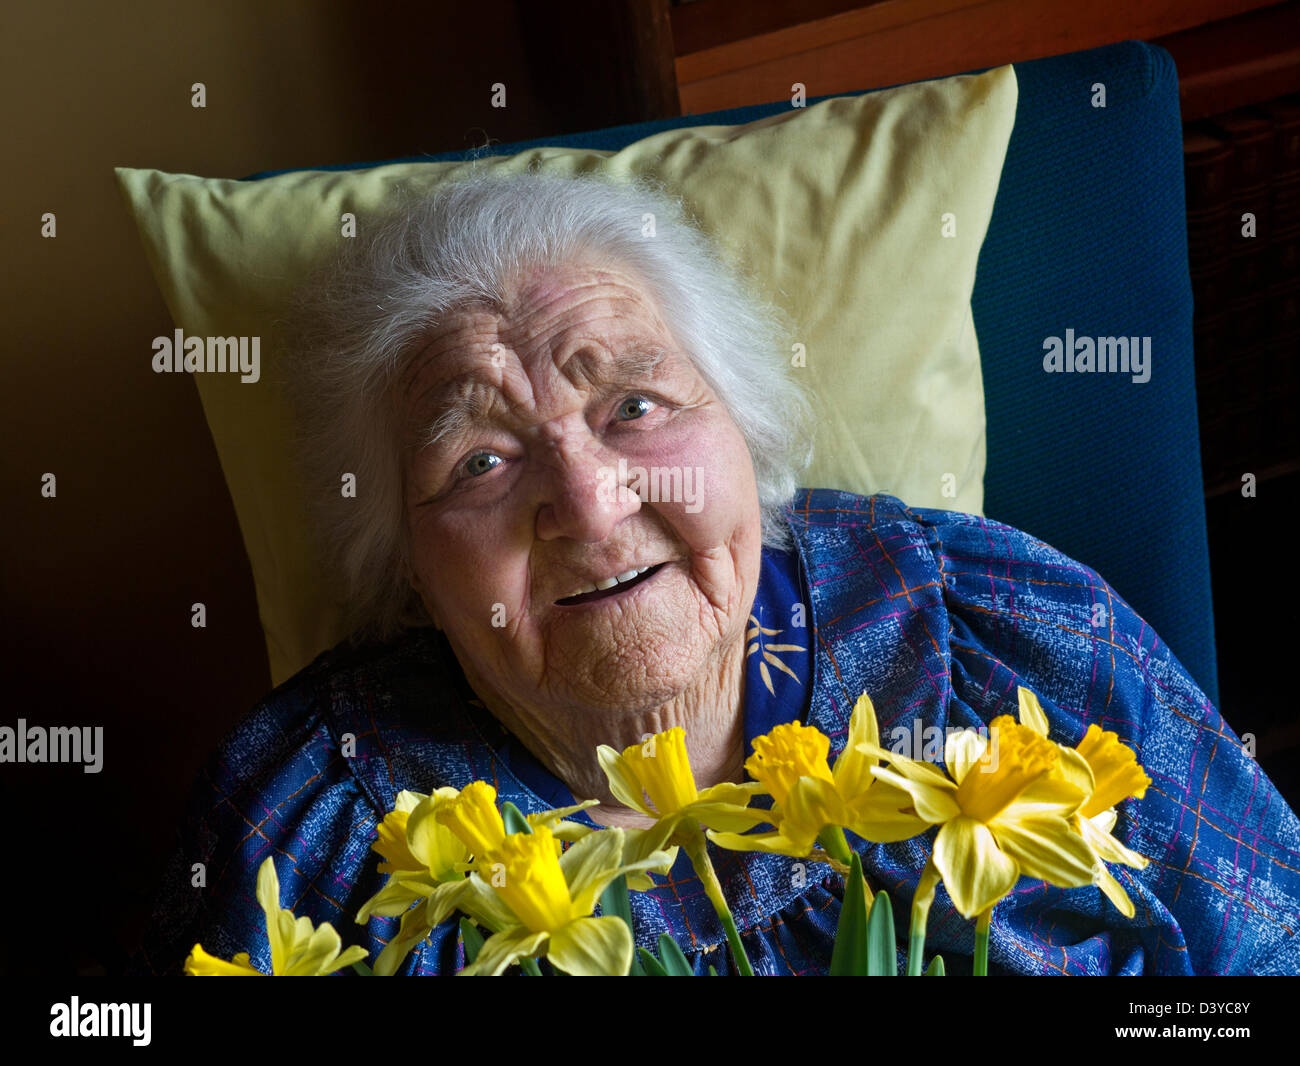 ELDERLY LADY FLOWERS CARE Contented happy smiling independent 99 years old elderly lady seated in room with a visitor presentation of daffodil flowers Stock Photo